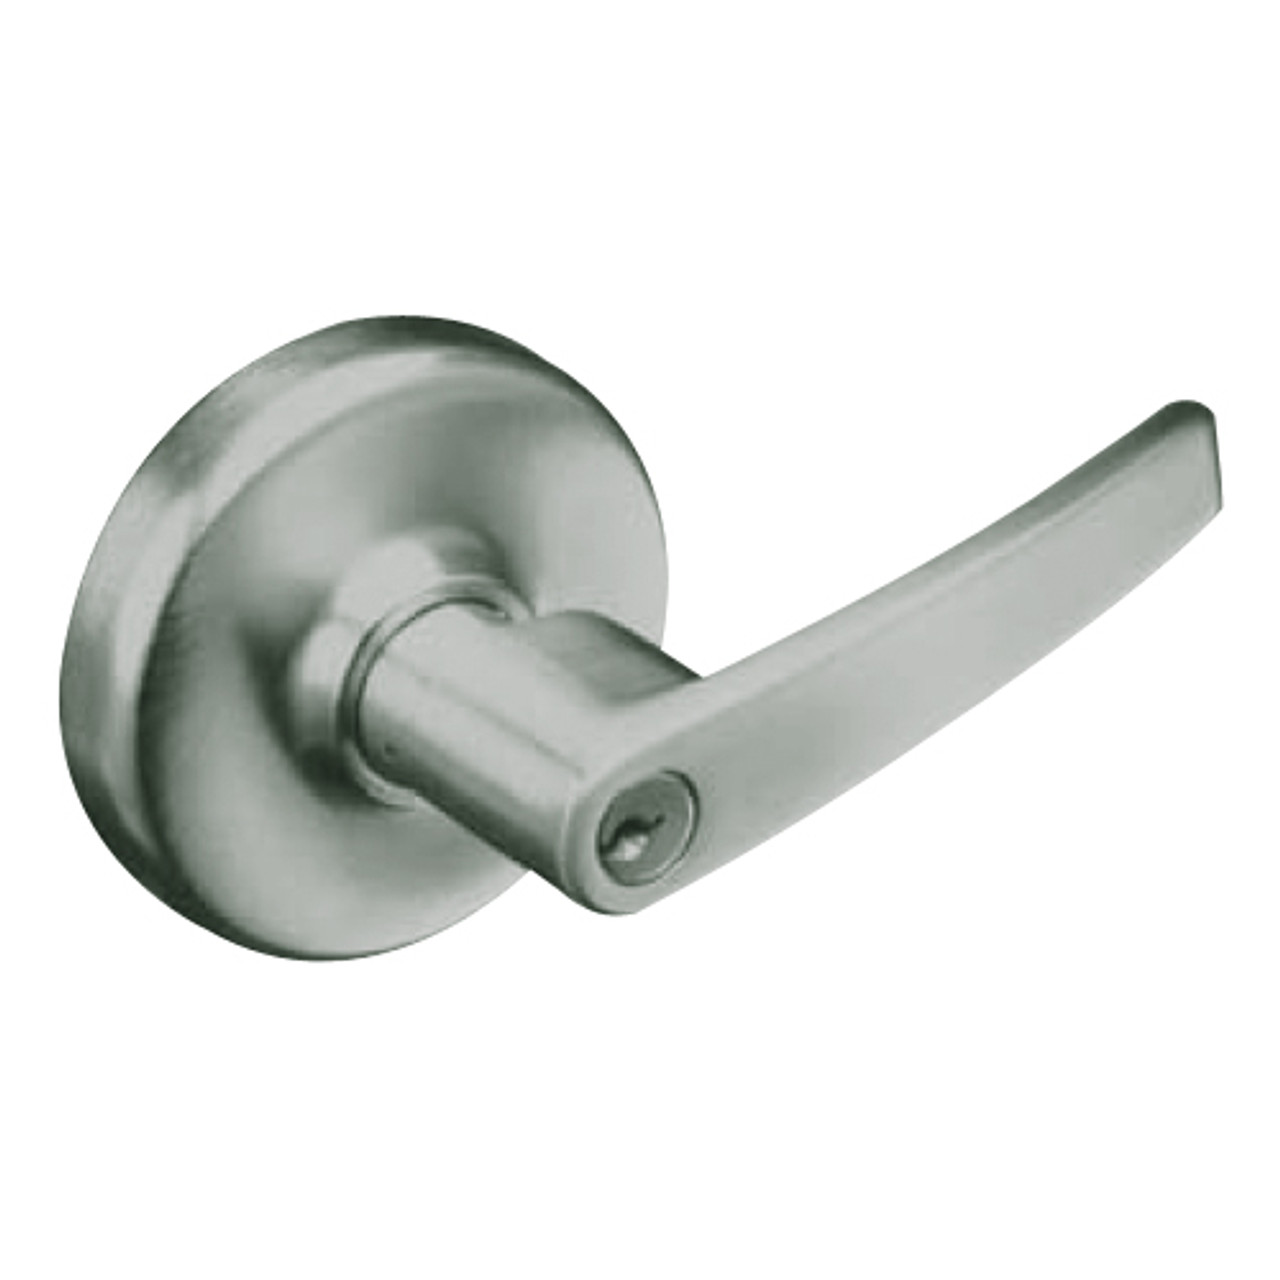 CL3161-AZD-619 Corbin CL3100 Series Vandal Resistant Entrance Cylindrical Locksets with Armstrong Lever in Satin Nickel Plated Finish